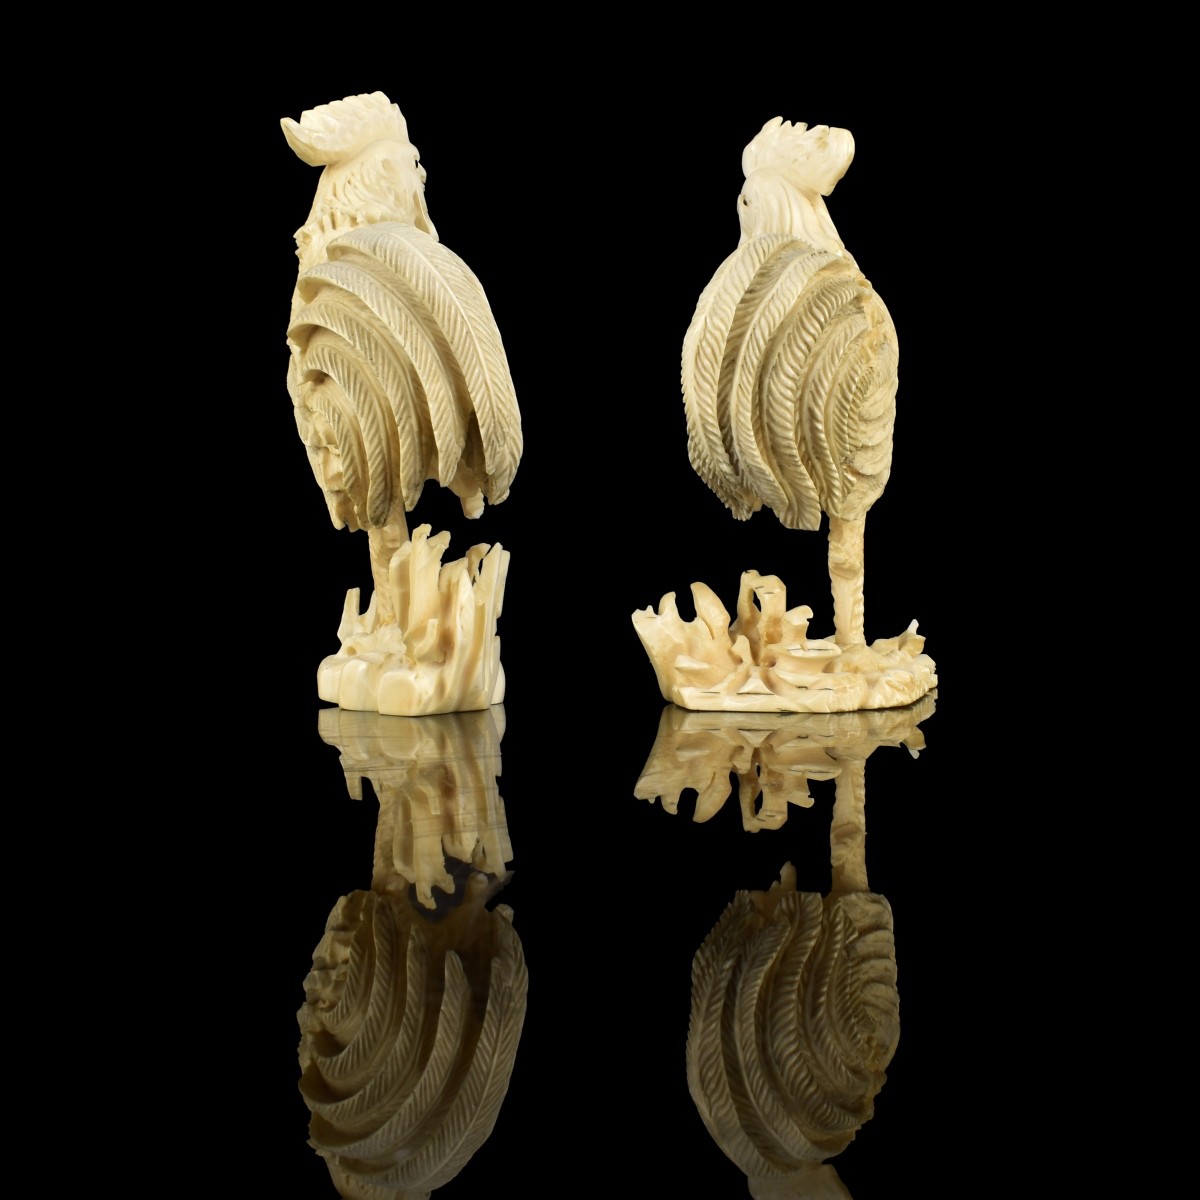 Pair of Antique Japanese Carved Rooster Figurines